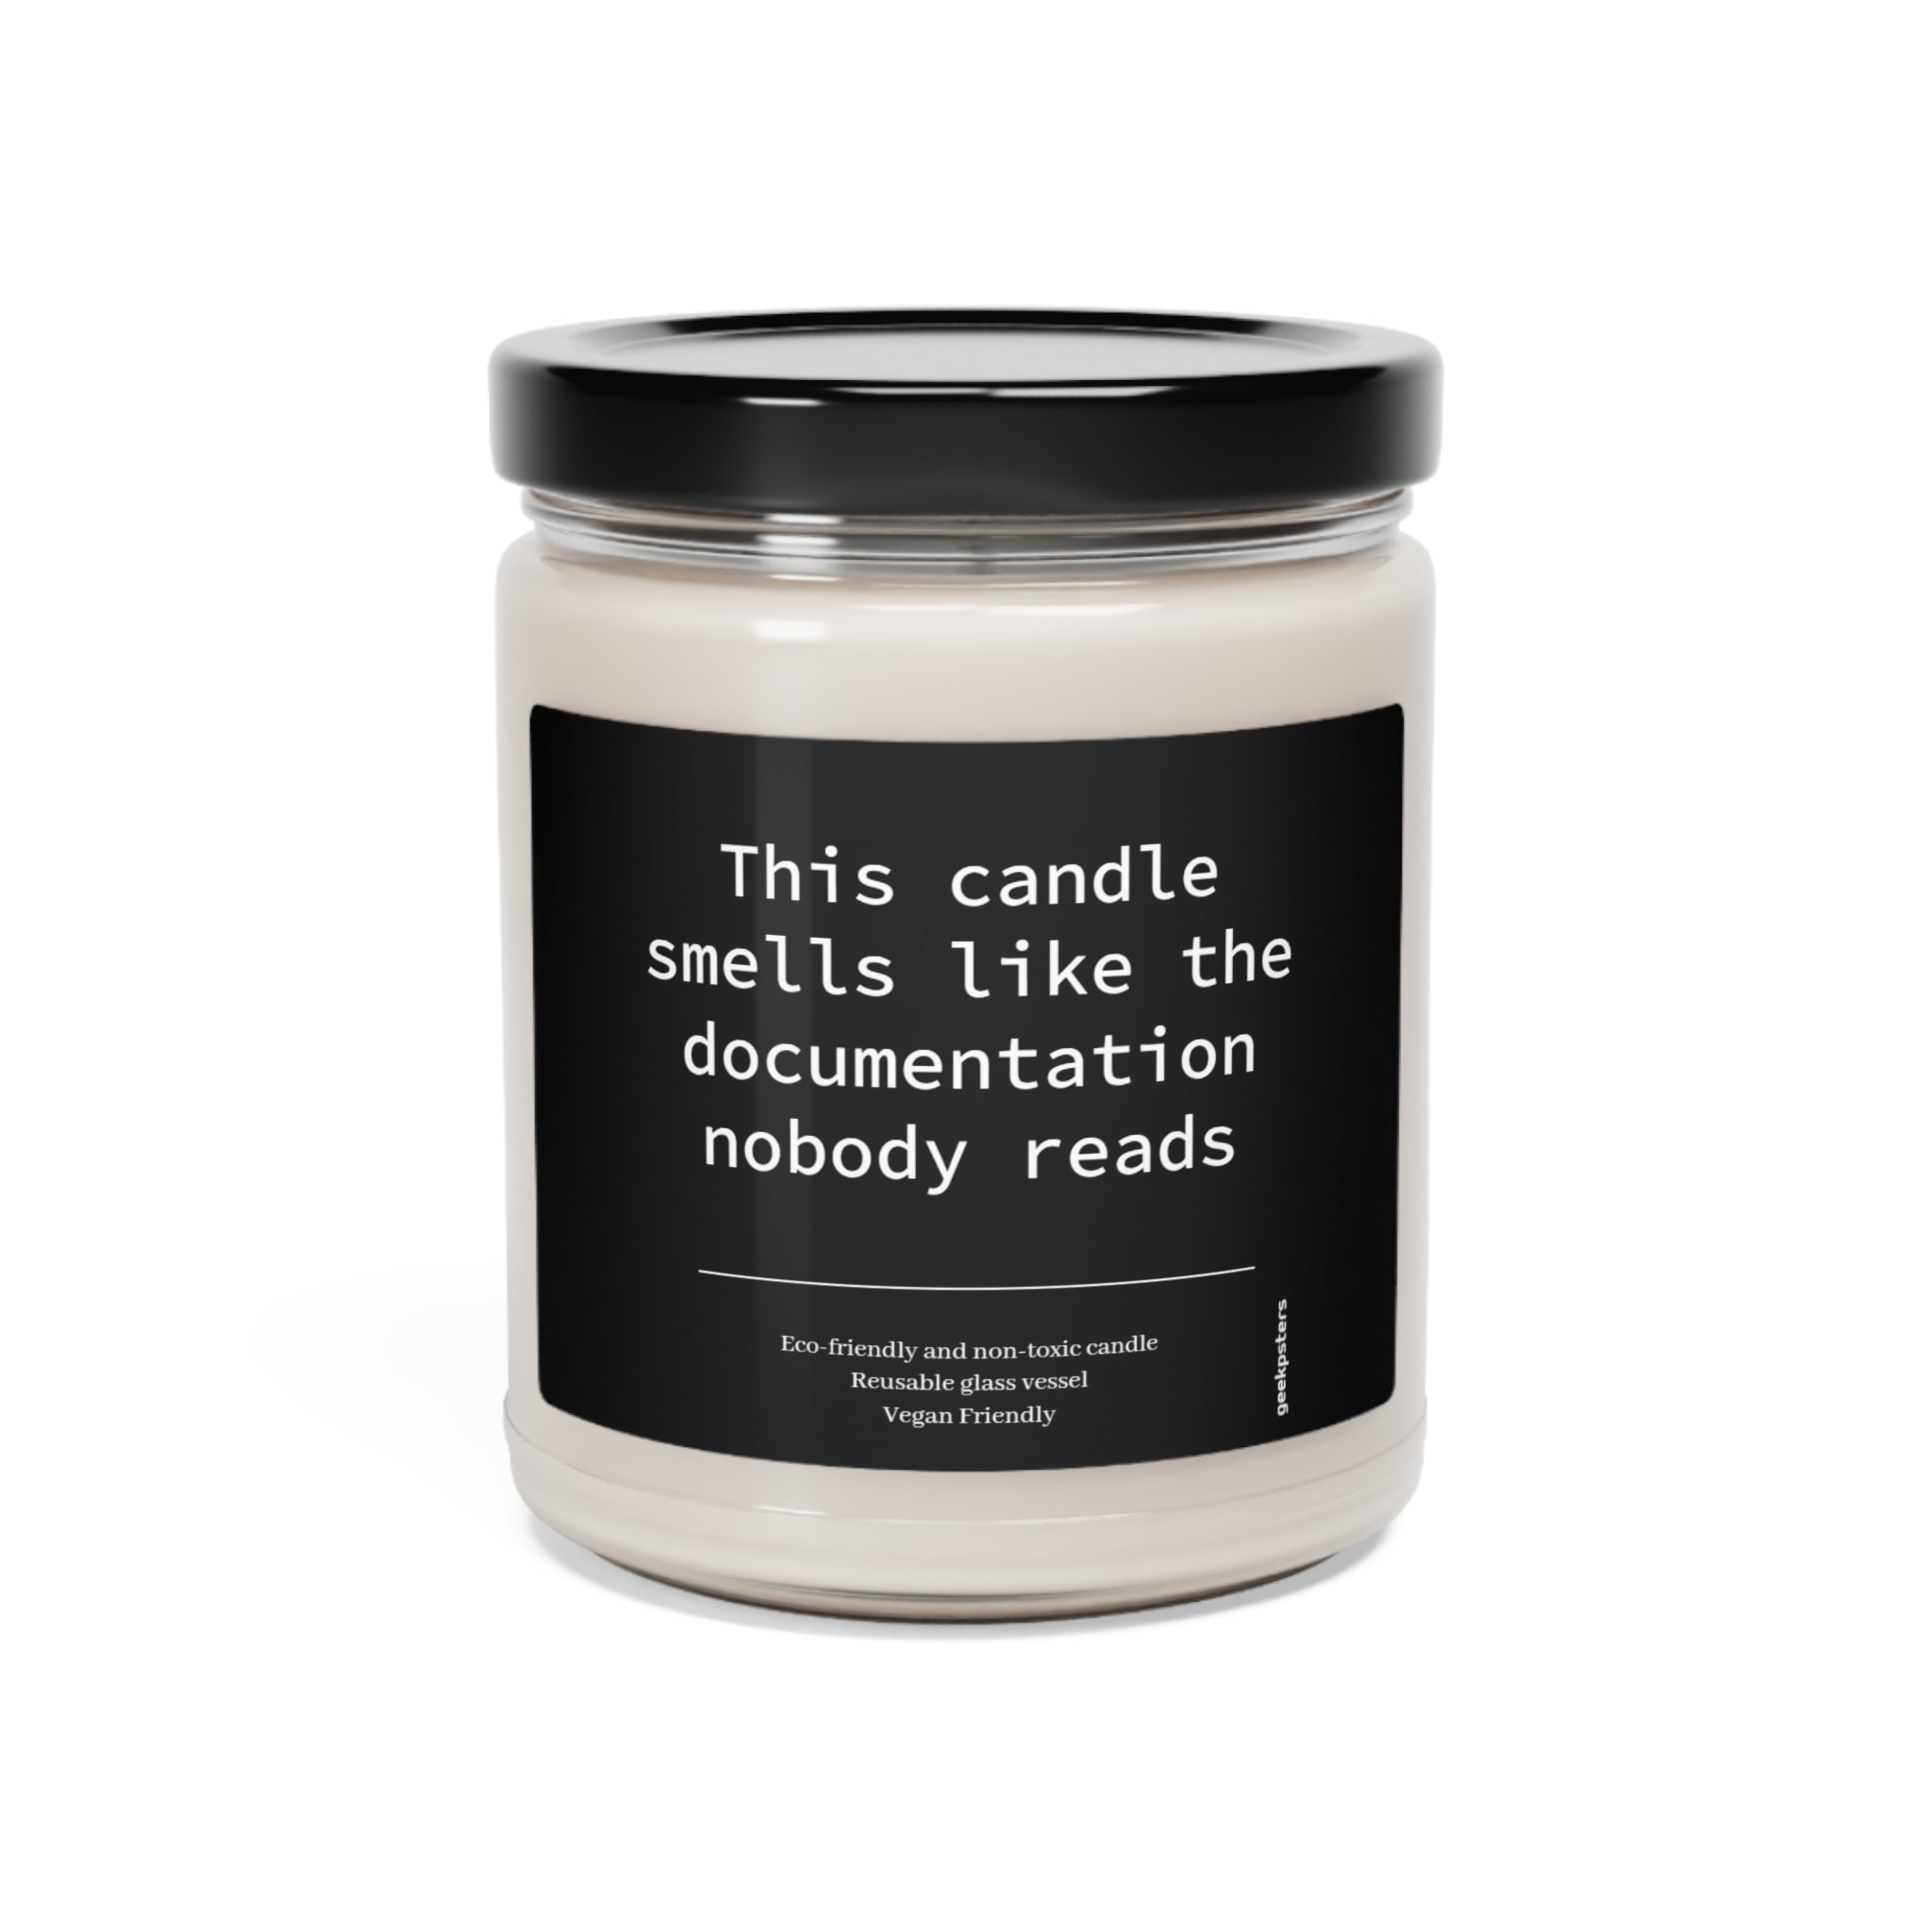 This Candle Smells Like the Documentation Nobody Reads scented soy candle, indicating a niche or ironic fragrance concept. Made with a natural soy wax blend.